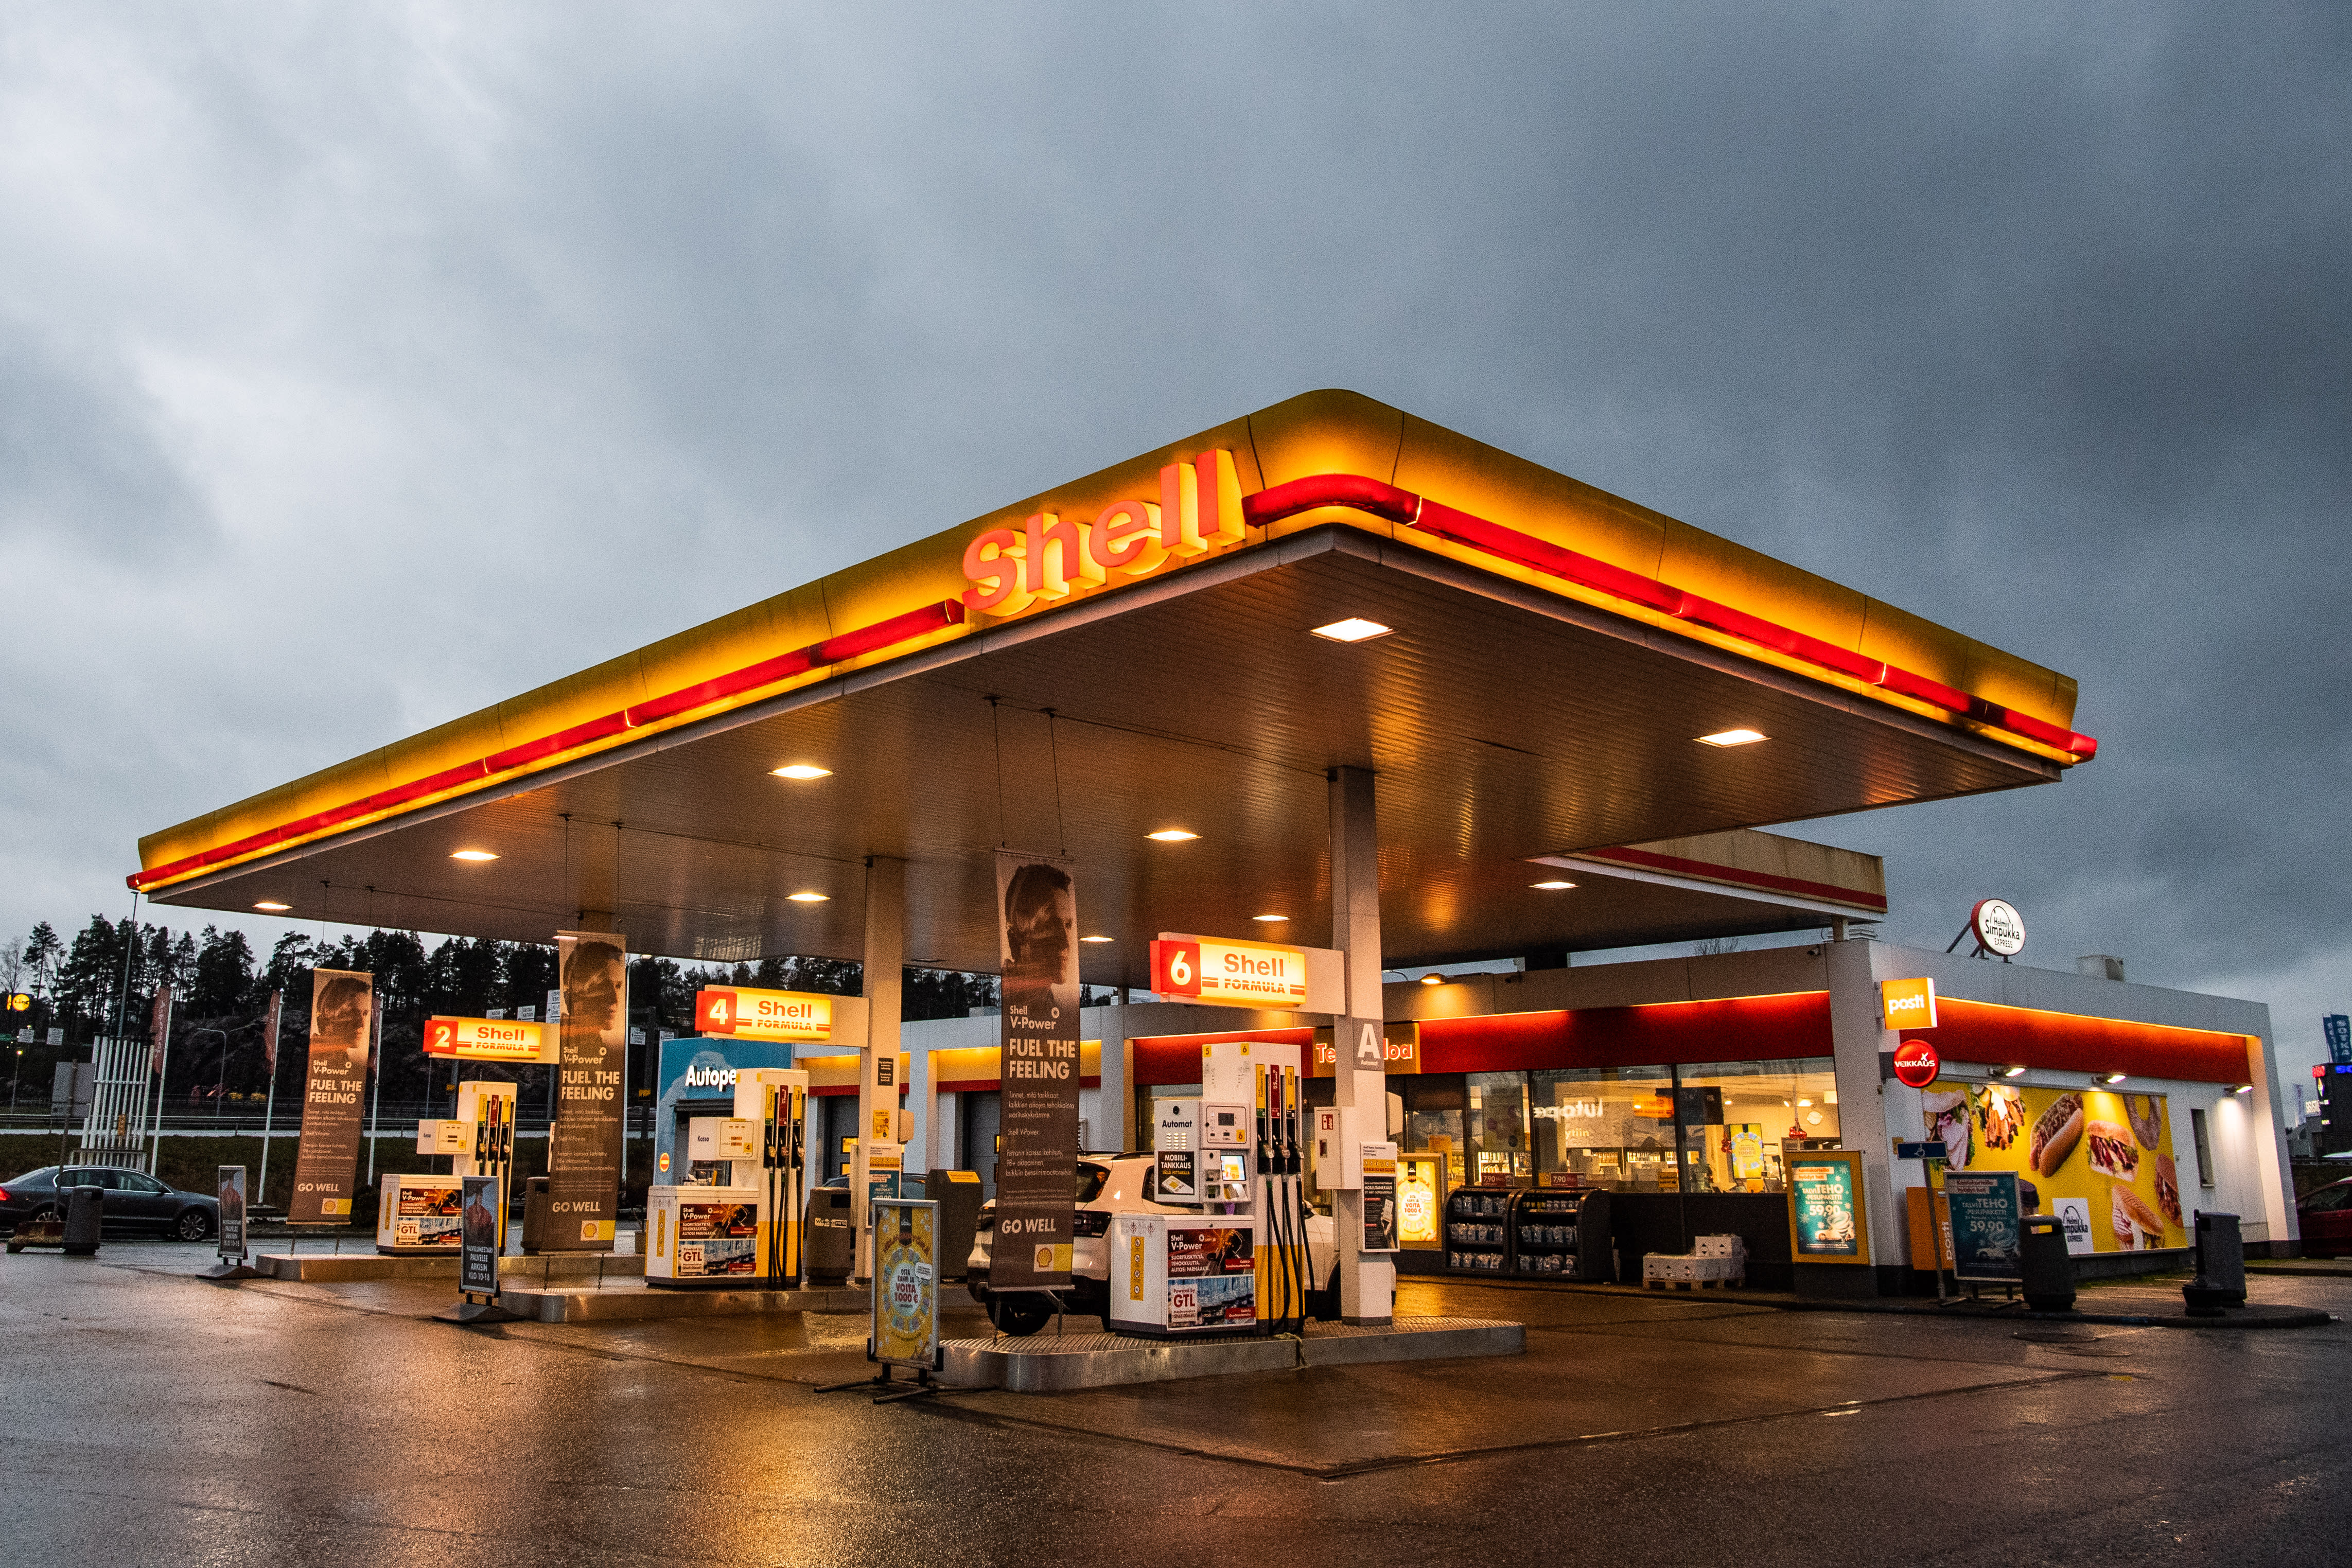 Shell-brand gas stations in Finland will soon be a thing of the past